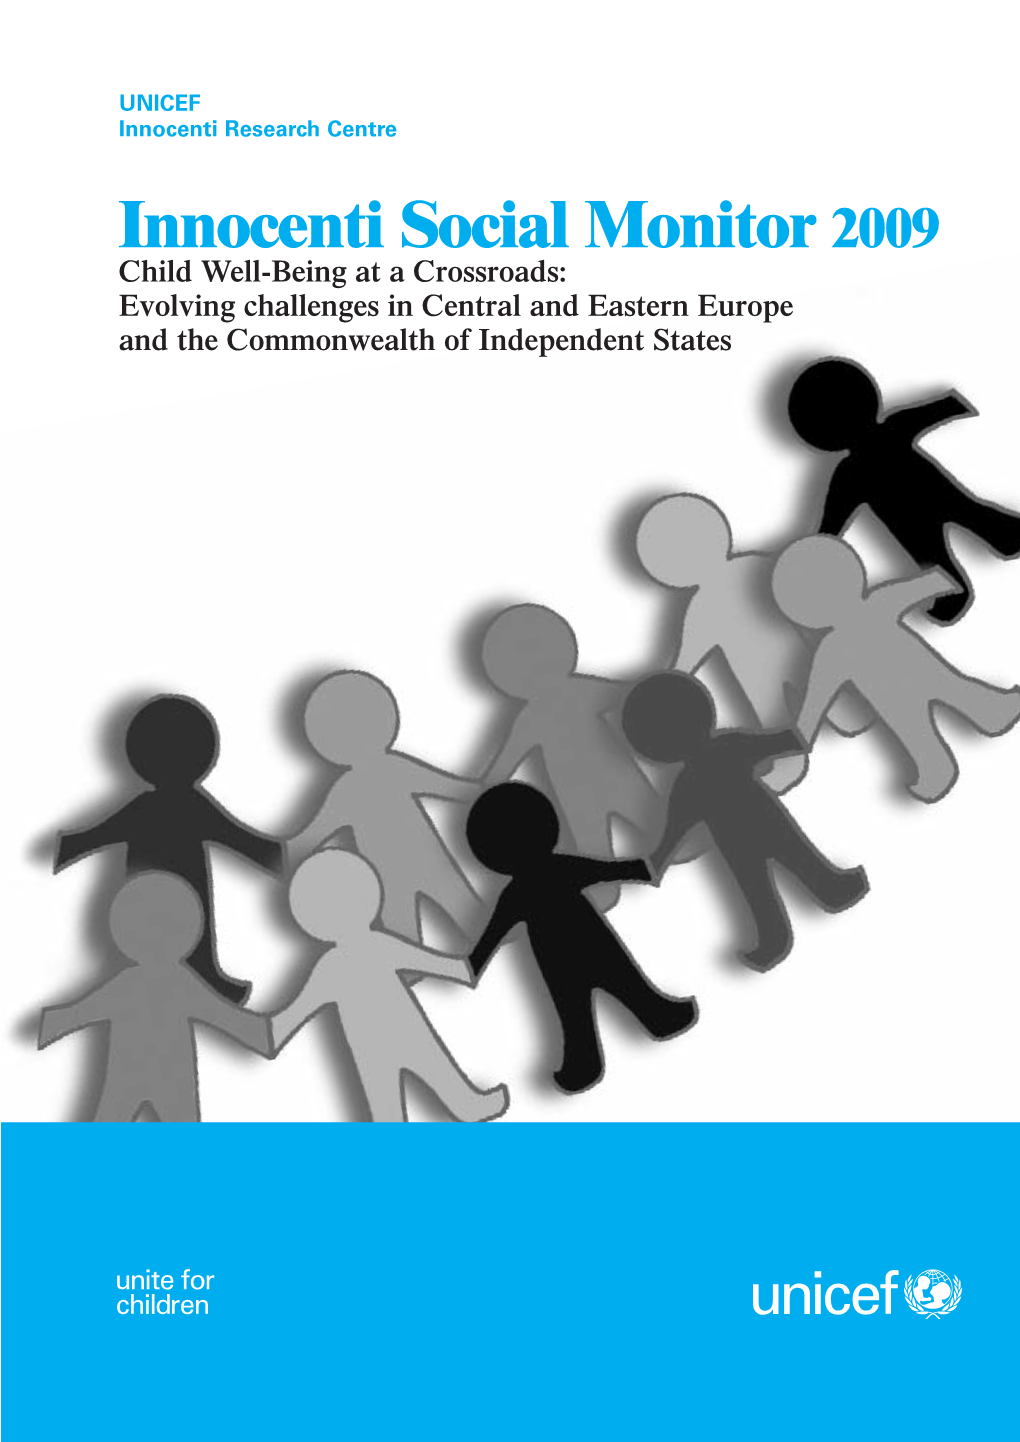 Innocenti Social Monitor 2009 Child Well-Being at a Crossroads: Evolving Challenges in Central and Eastern Europe and the Commonwealth of Independent States